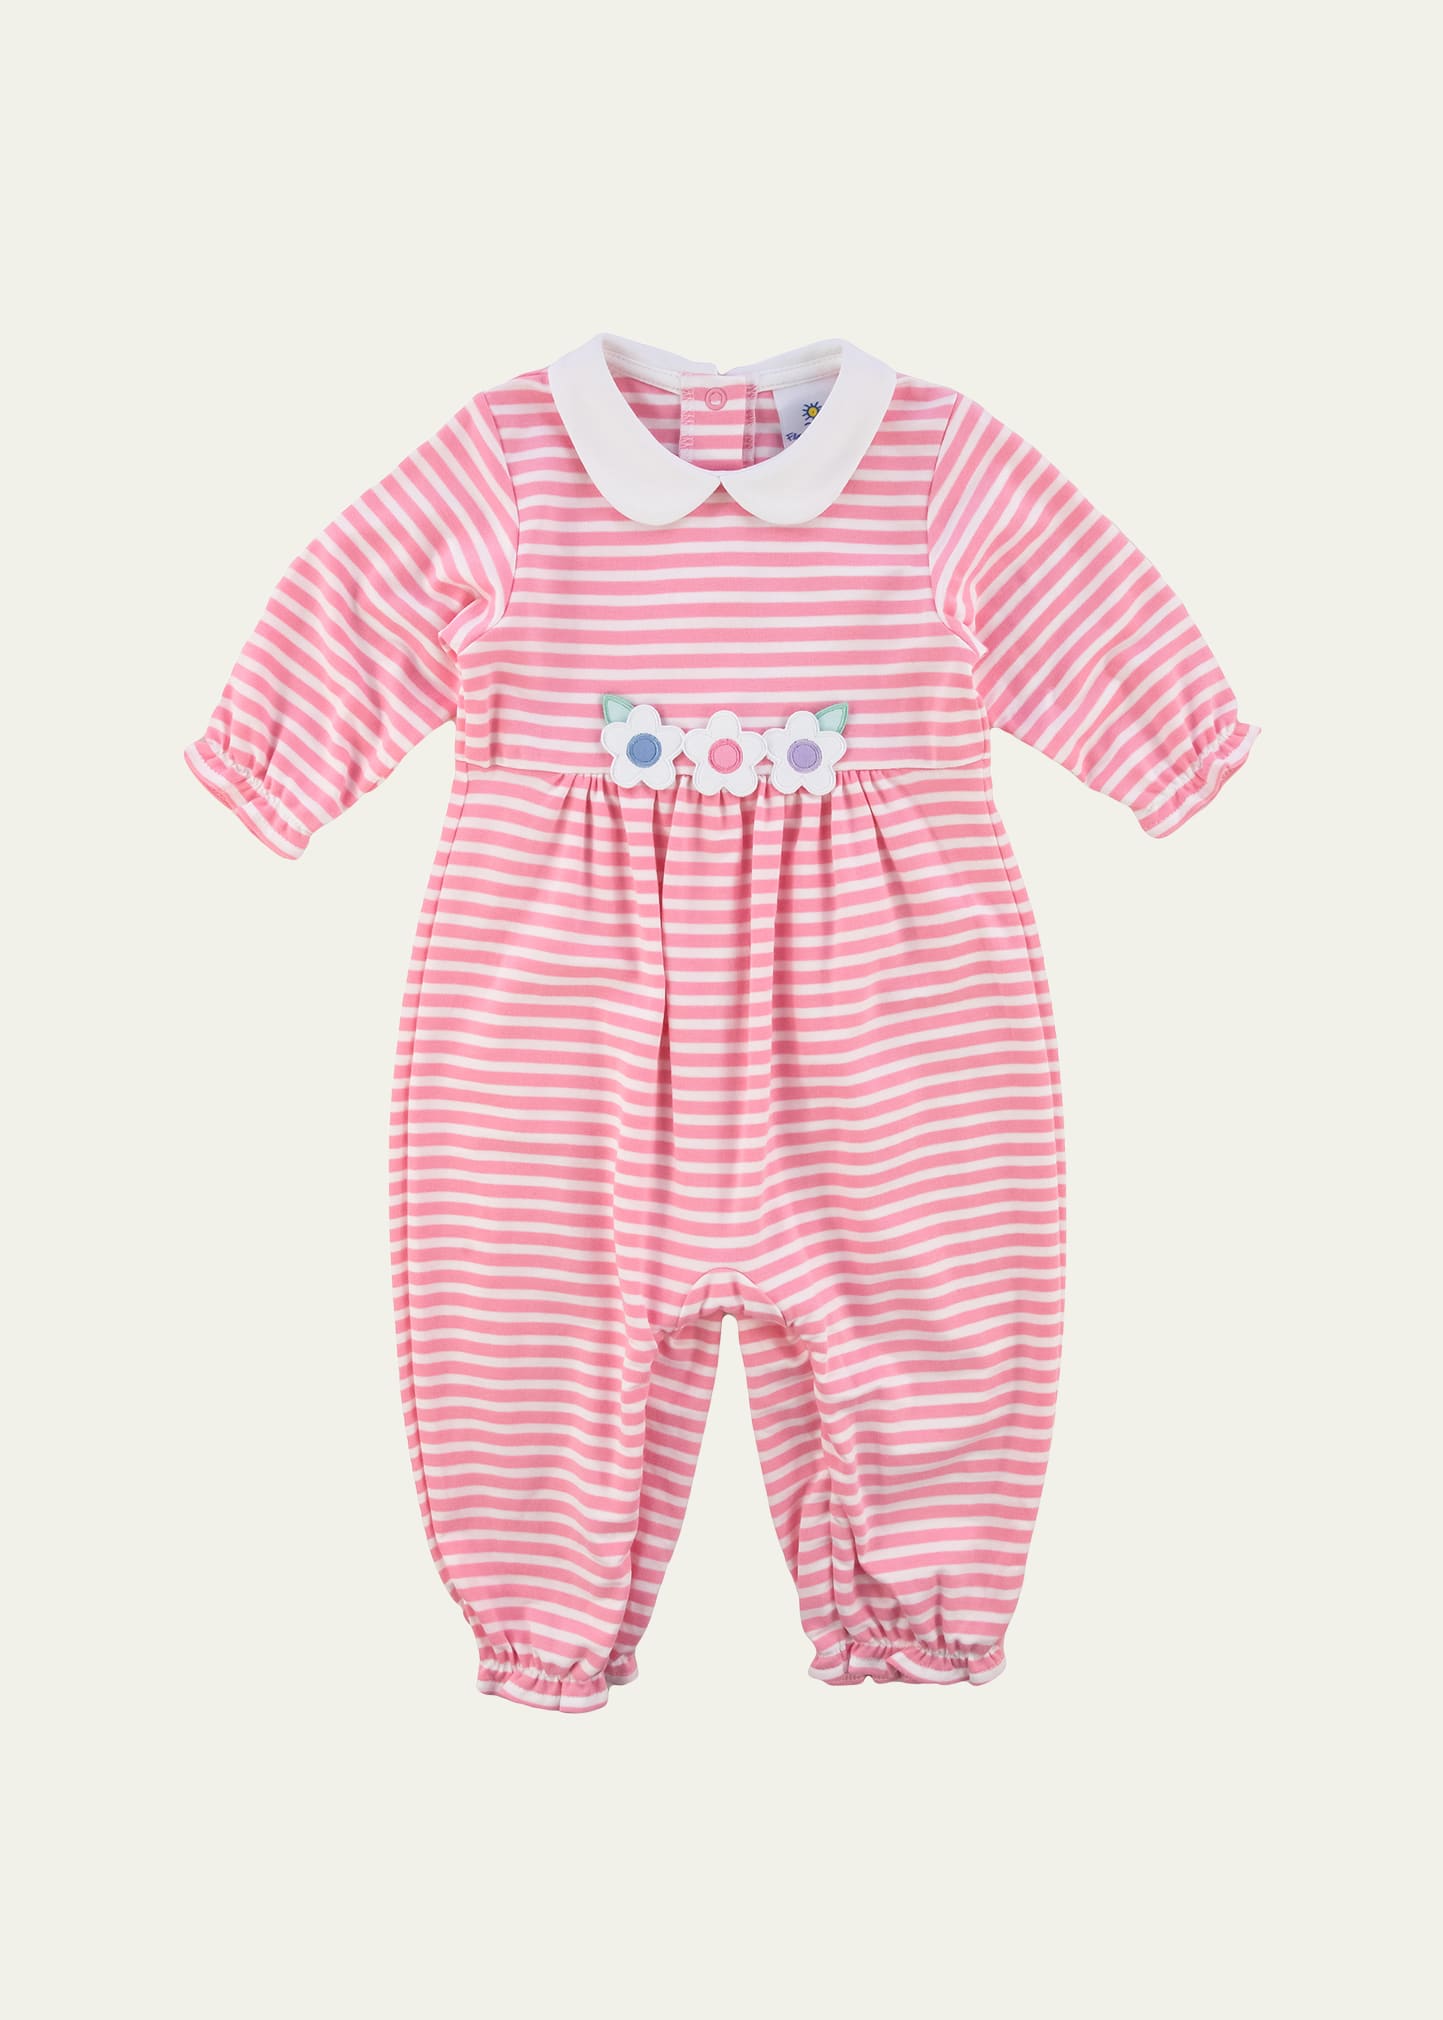 Girl's Striped Knit Coverall W/ Flower Applique, Size 3M-18M